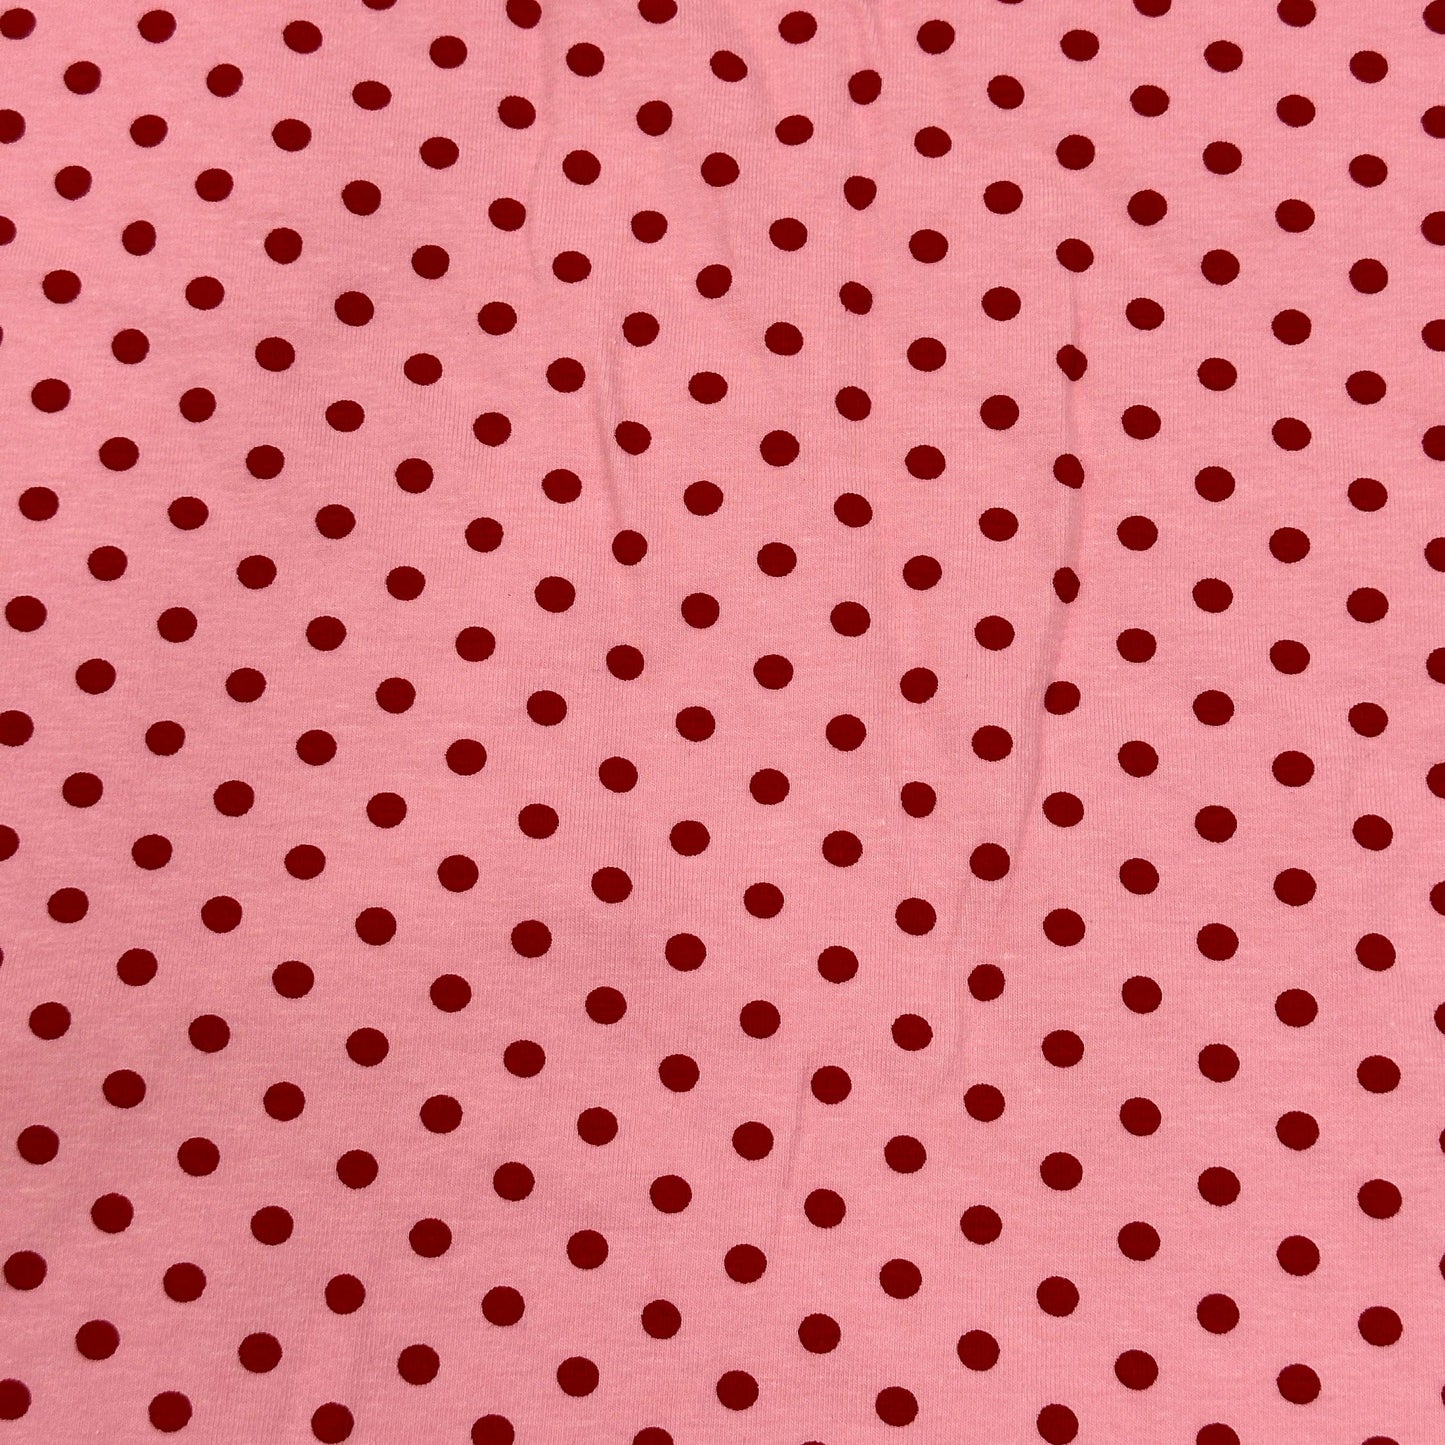 Red Dots on Pink Cotton/Spandex Jersey Fabric - Nature's Fabrics